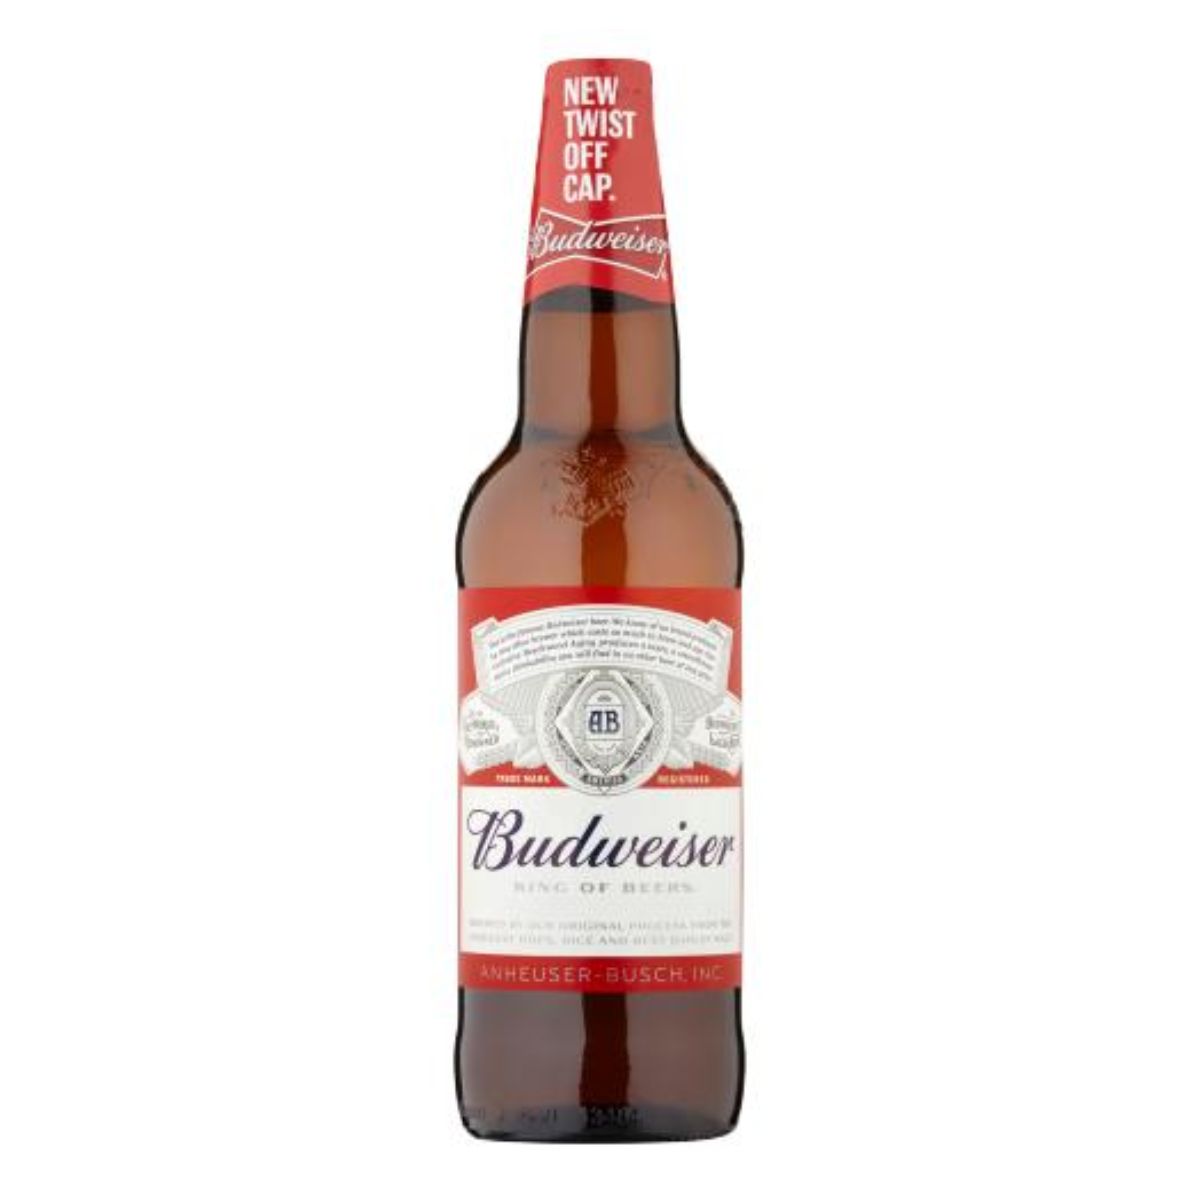 A bottle of Budweiser - Lager Beer Bottle (4.5% ABV) - 660ml on a white background.